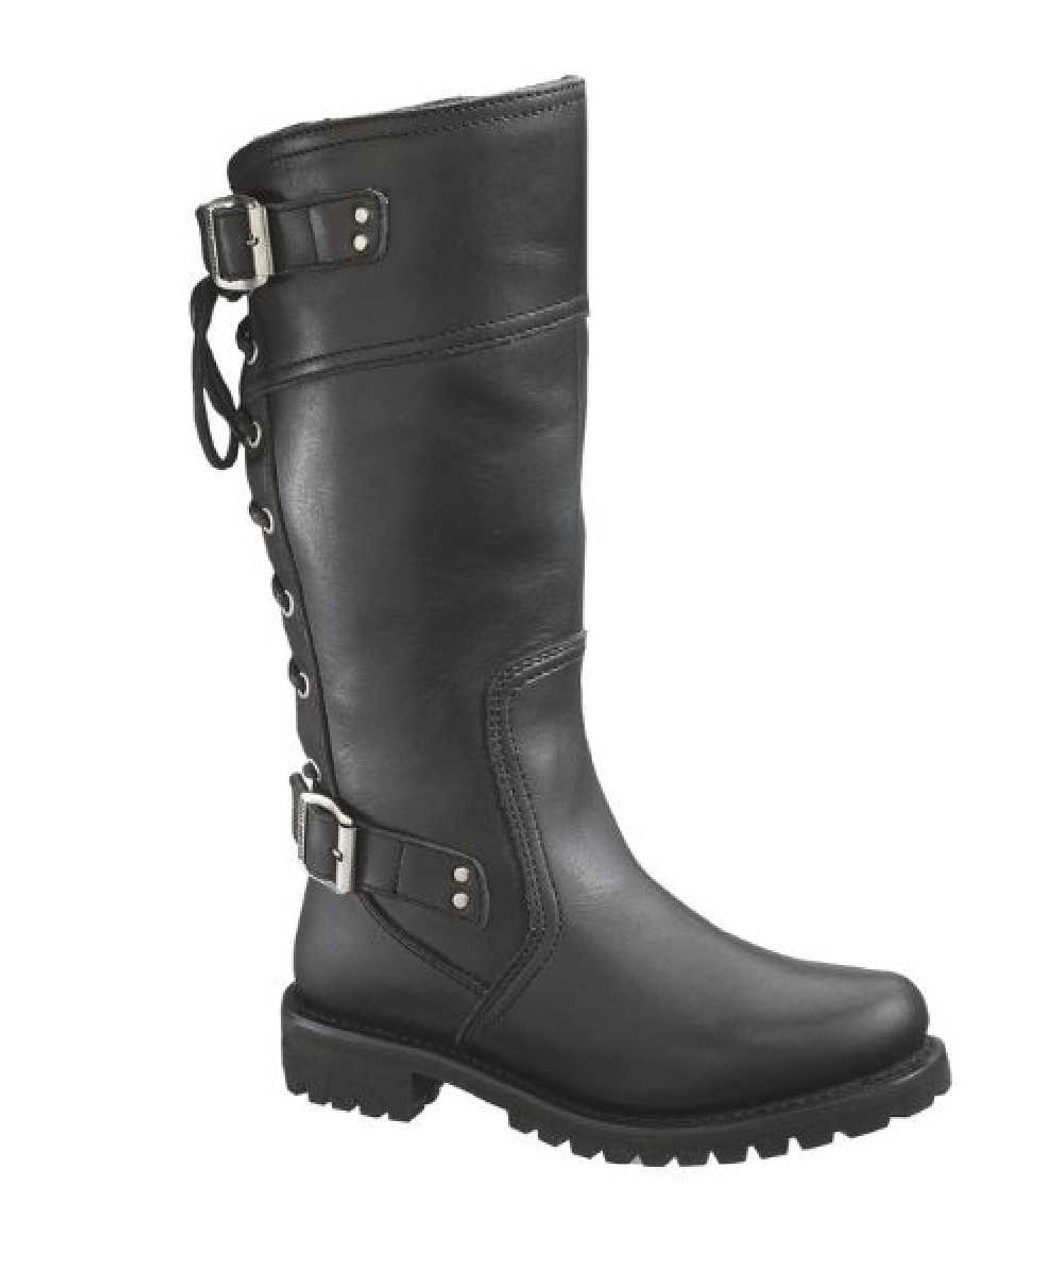 .com  perixir Motorcycle Boots, black booties for women